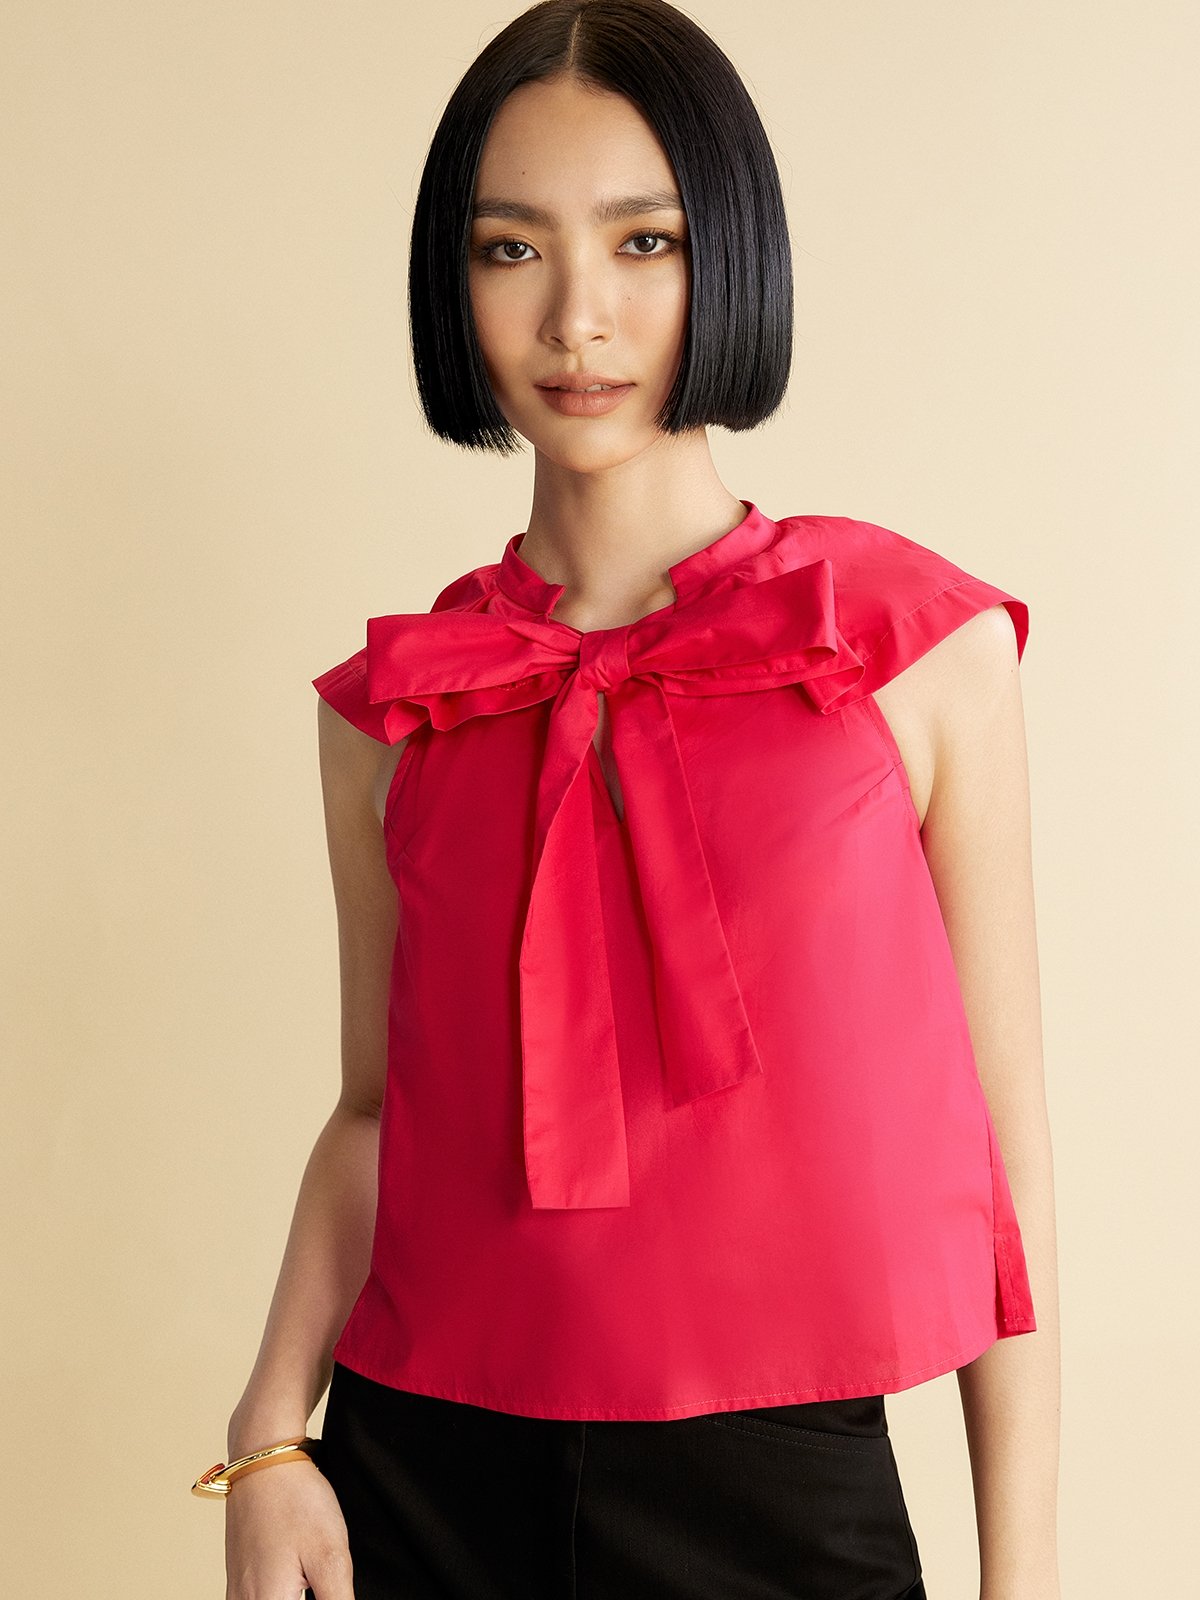 Bow Tie Blouse - Hot Pink - Pomelo Fashion